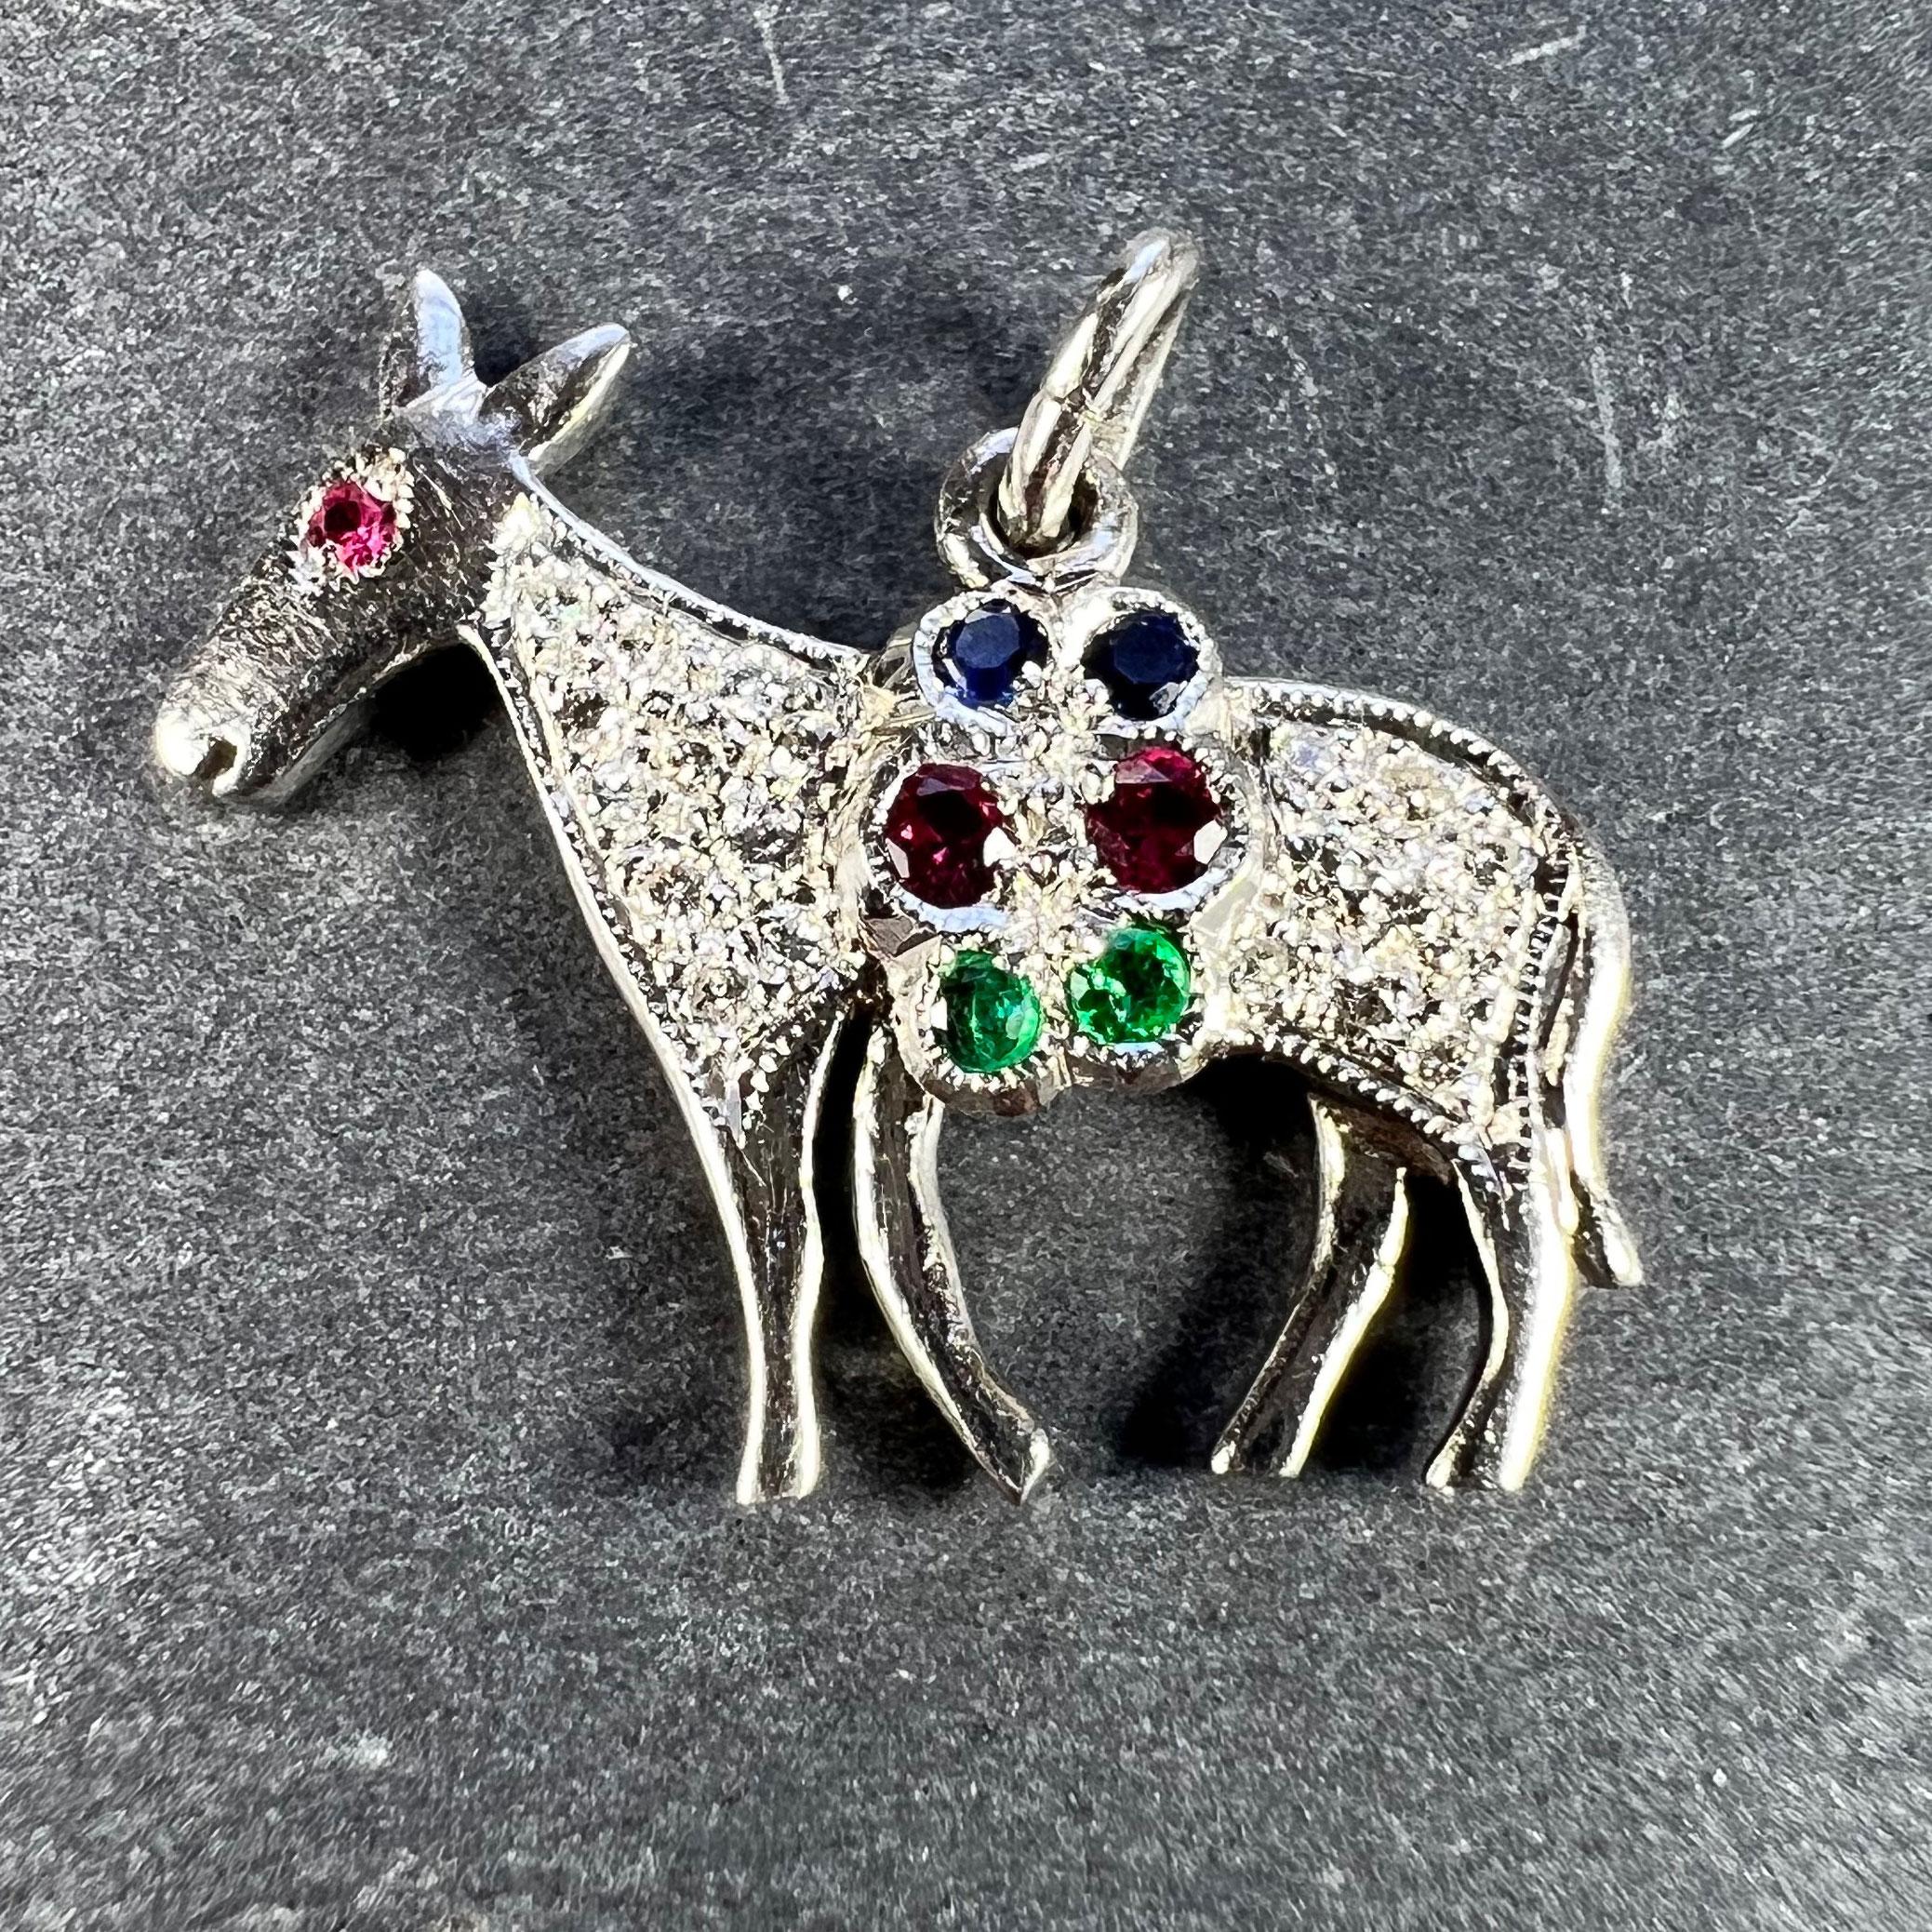 An Art Deco platinum charm pendant designed as a donkey, mule or horse carrying a pannier of gems, set with 20 round brilliant cut white diamonds, three rubies, two sapphires and two emeralds. Unmarked but tested for platinum.

Gemstone